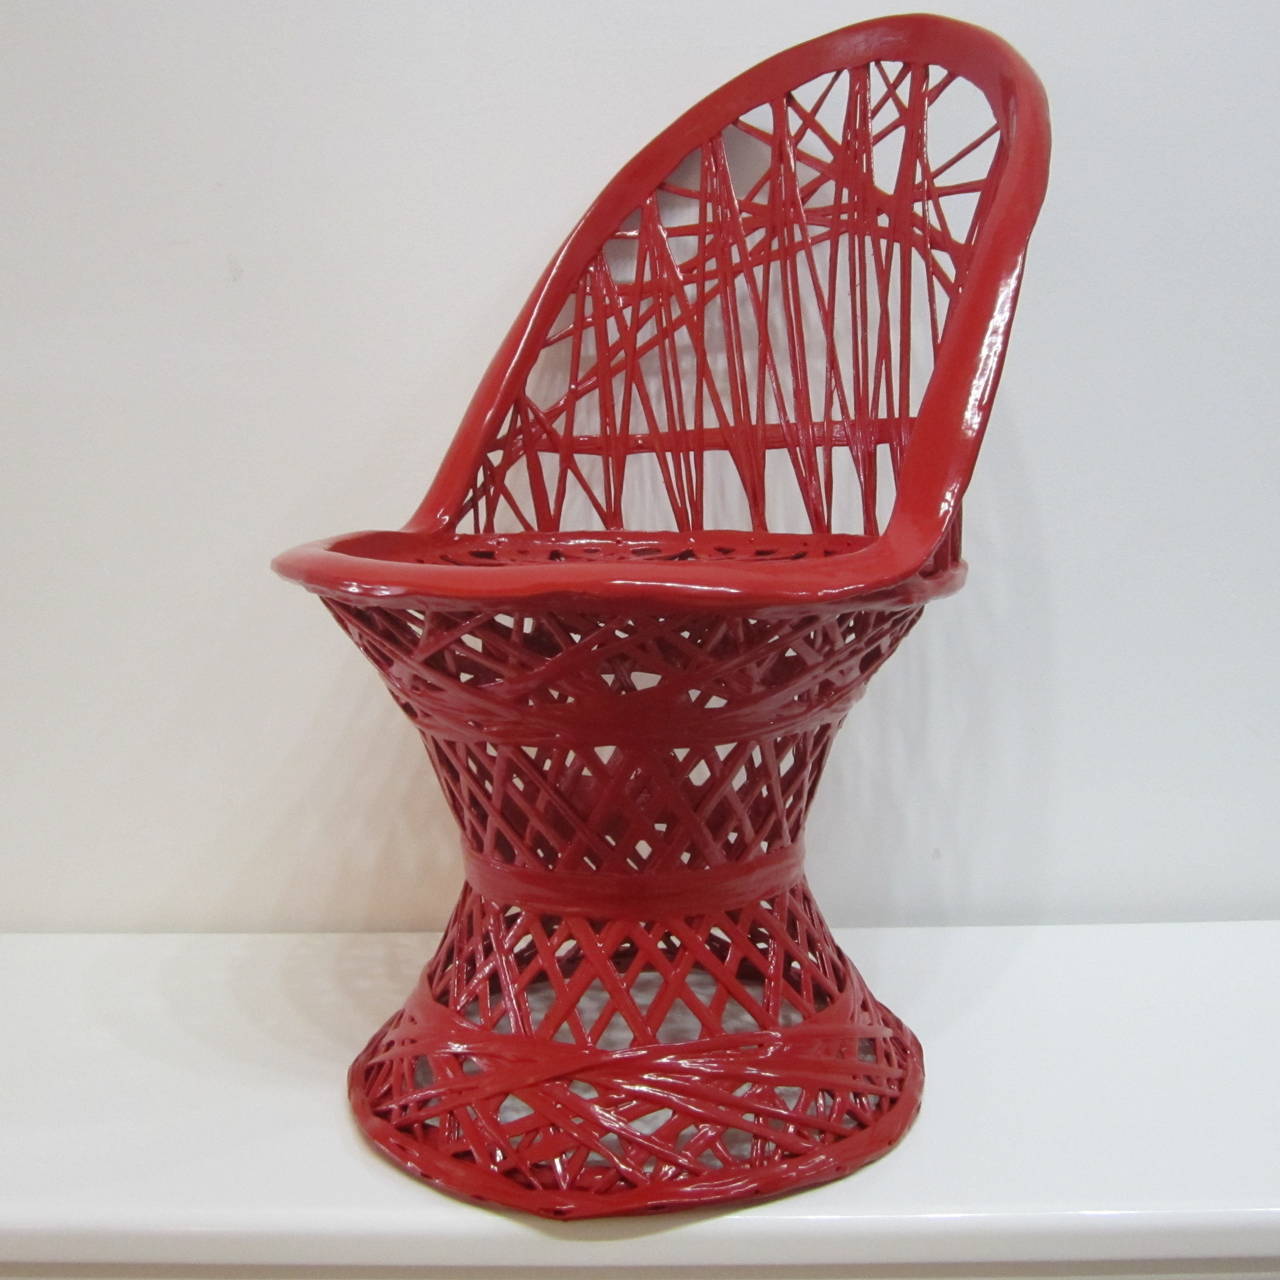 Small spun aluminum chair lacquered in rich fire engine red.